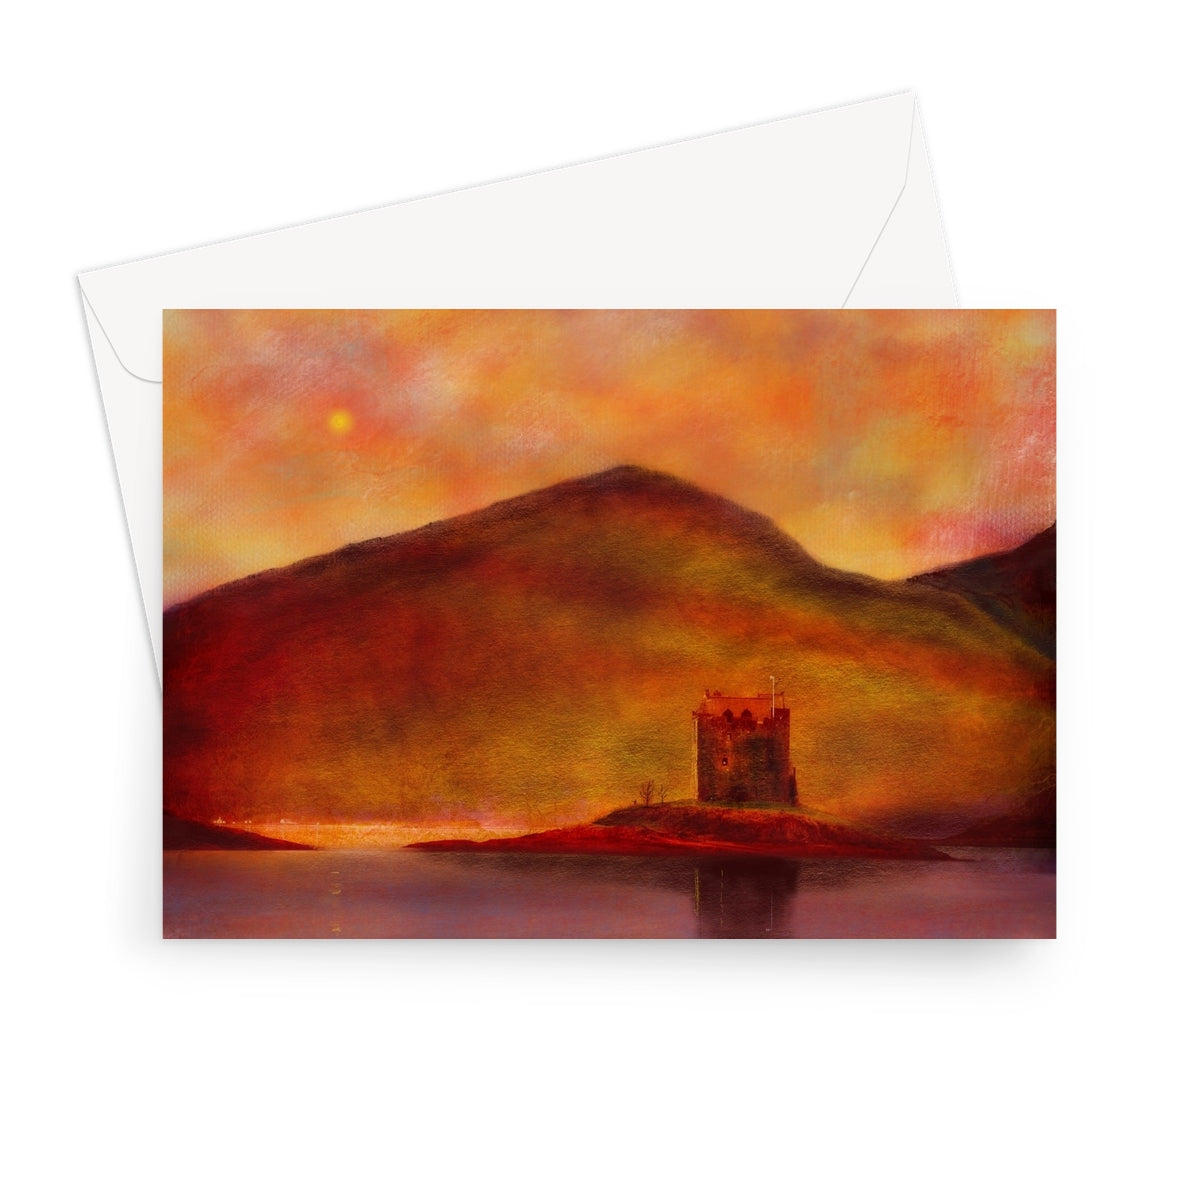 Castle Stalker Sunset Art Gifts Greeting Card-Greetings Cards-Historic & Iconic Scotland Art Gallery-7"x5"-1 Card-Paintings, Prints, Homeware, Art Gifts From Scotland By Scottish Artist Kevin Hunter